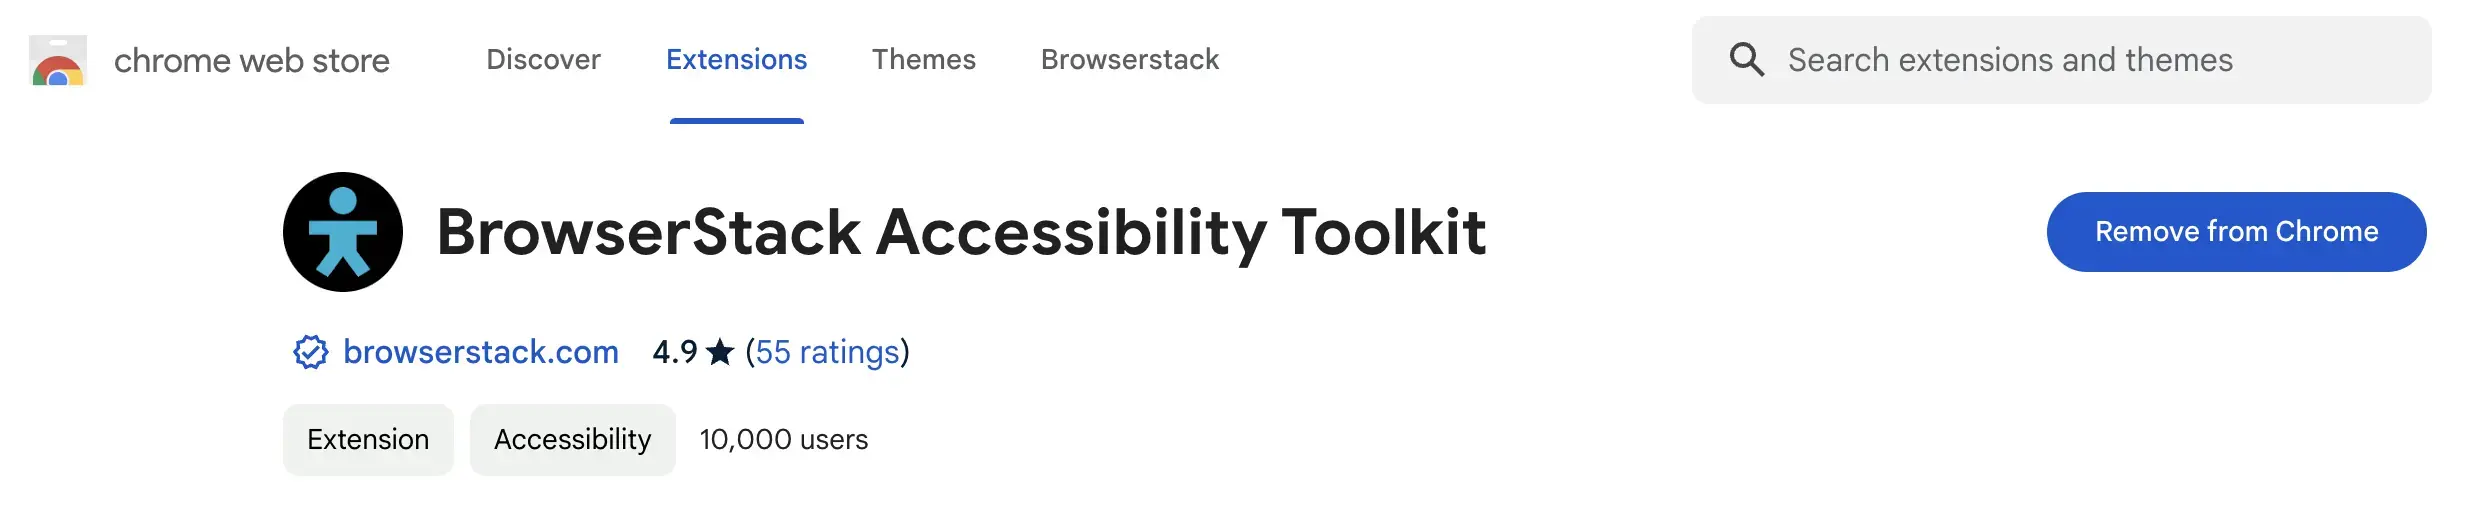 BrowserStack Accessibility Toolkit Chrome Extension